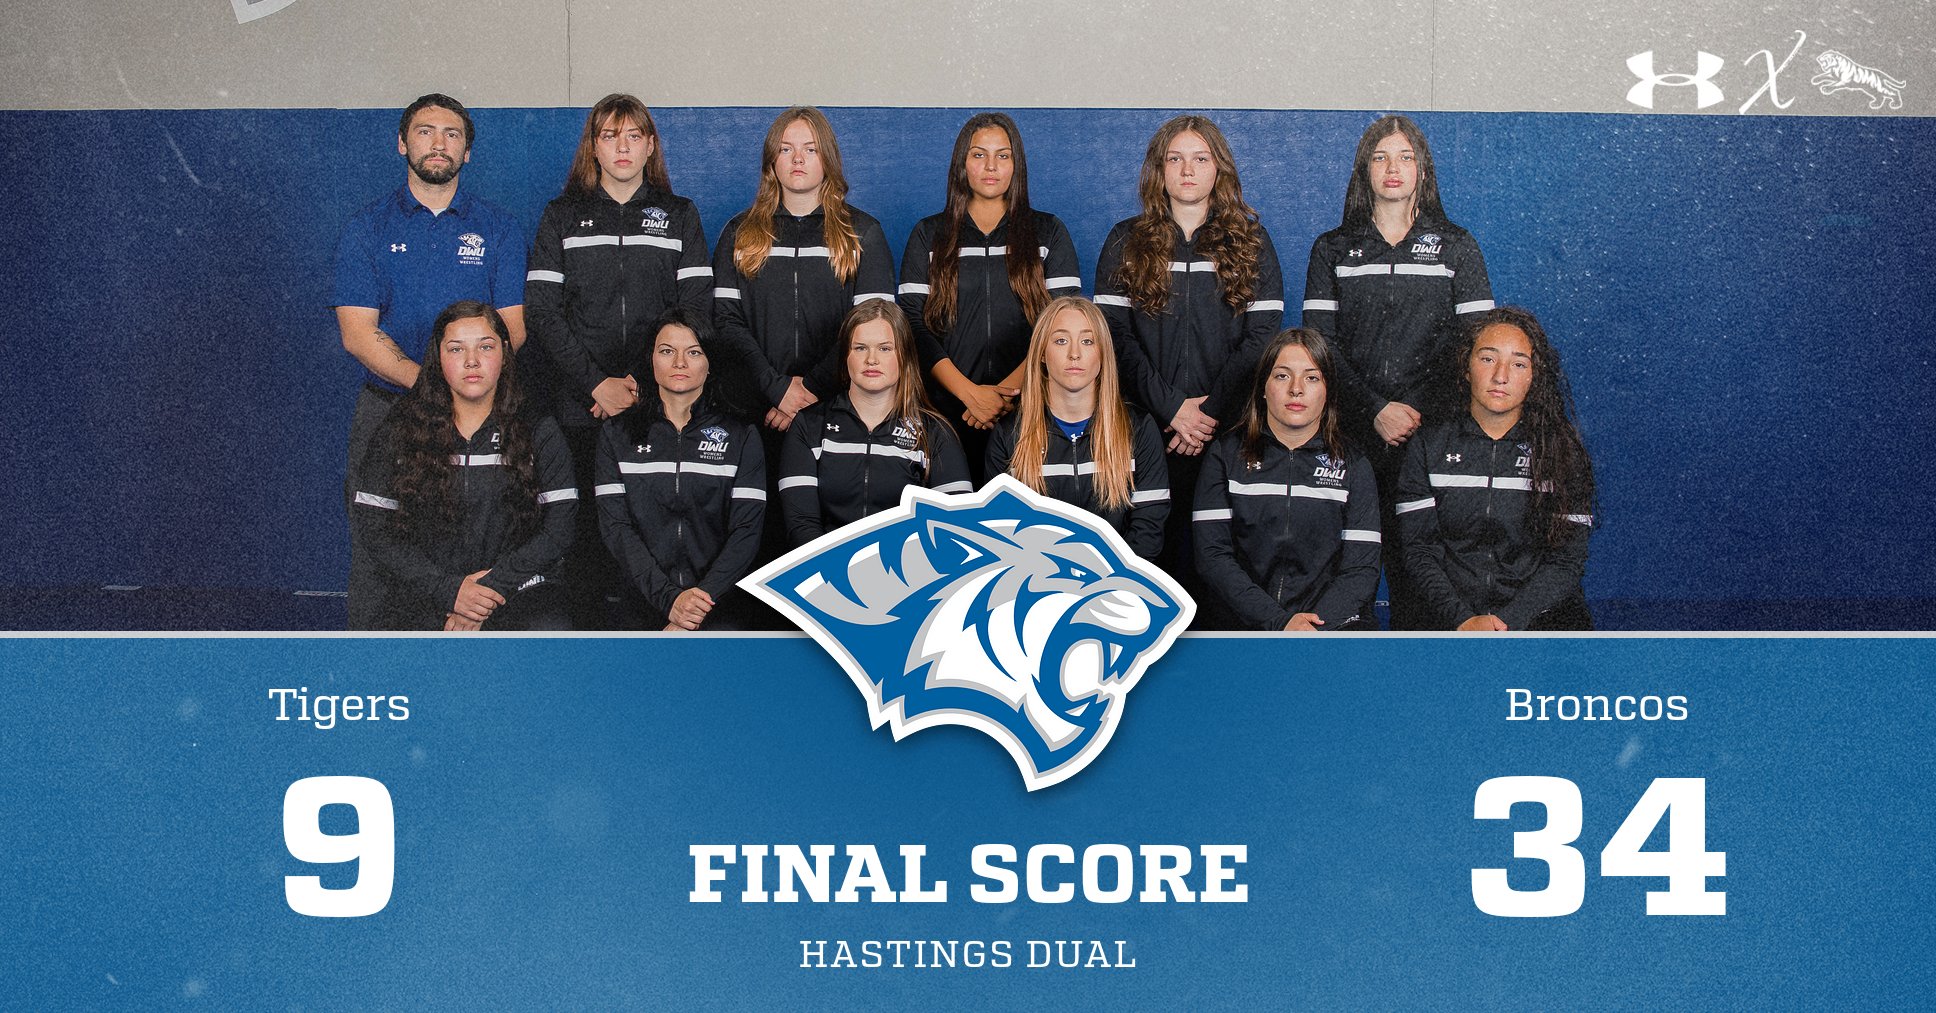 DWU WOMEN’S WRESTLING DROP FIRST DUAL OF THE SEASON TO HASTINGS, 34-9